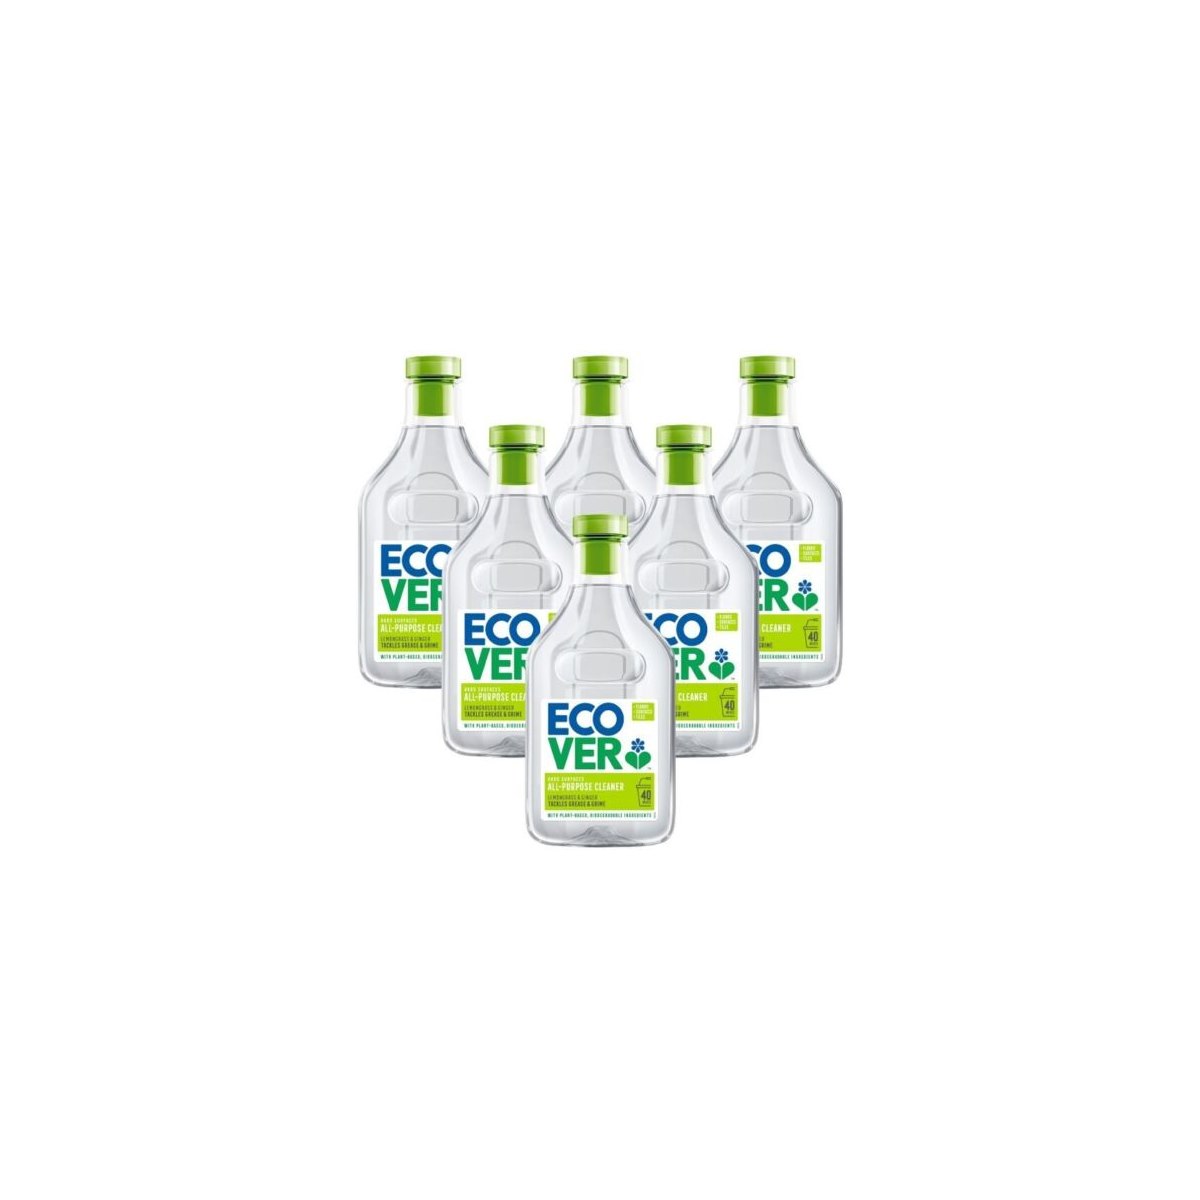 Case of 6 x Ecover All Purpose Cleaner Lemongrass and Ginger 1 Litre